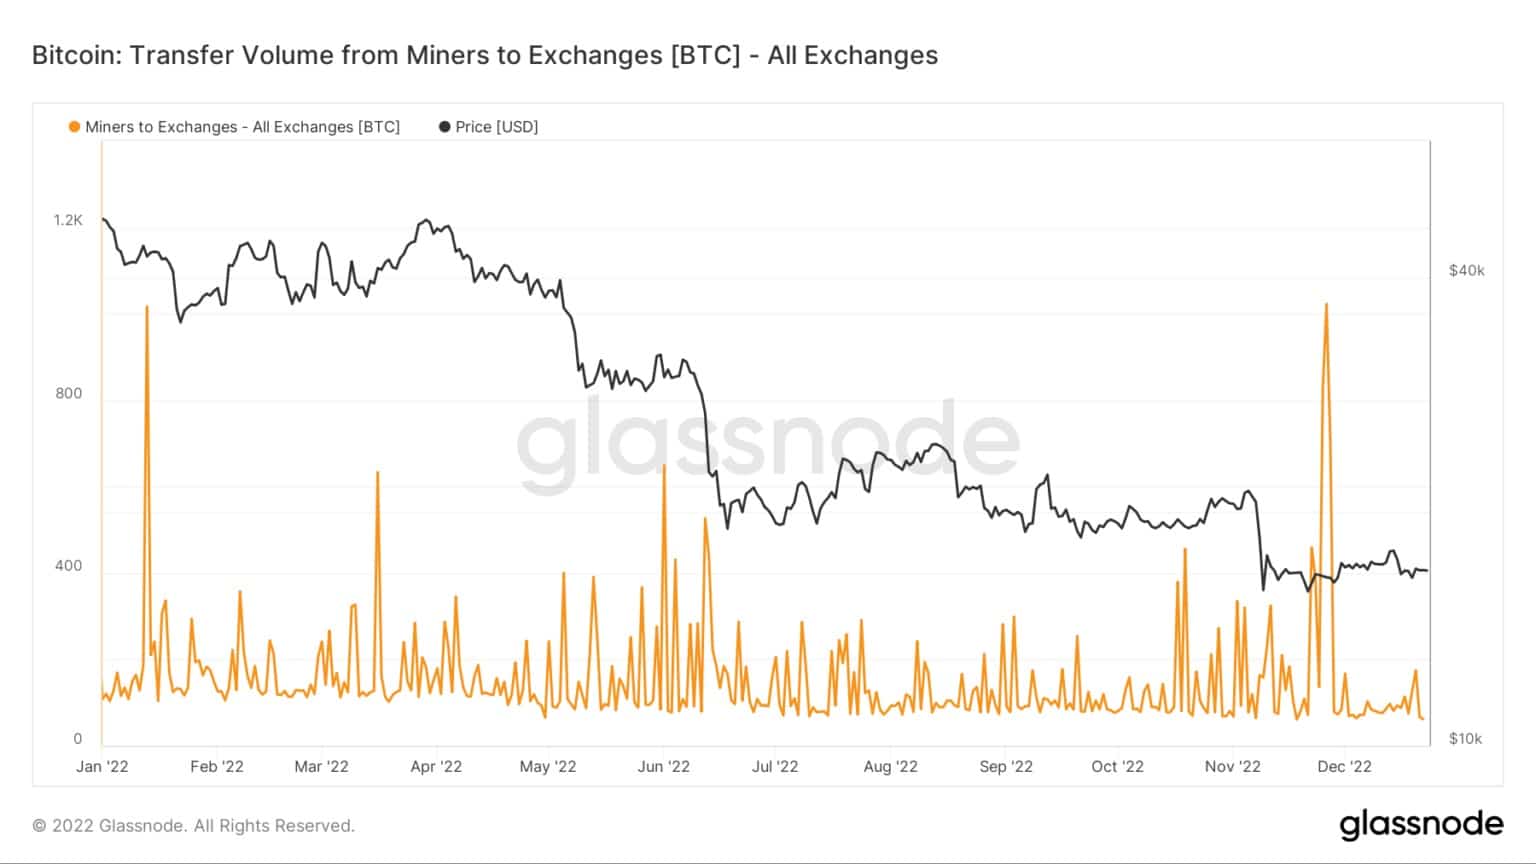 Bitcoin: Transfer Volume from Miners to Exchanges / Source: Glassnode